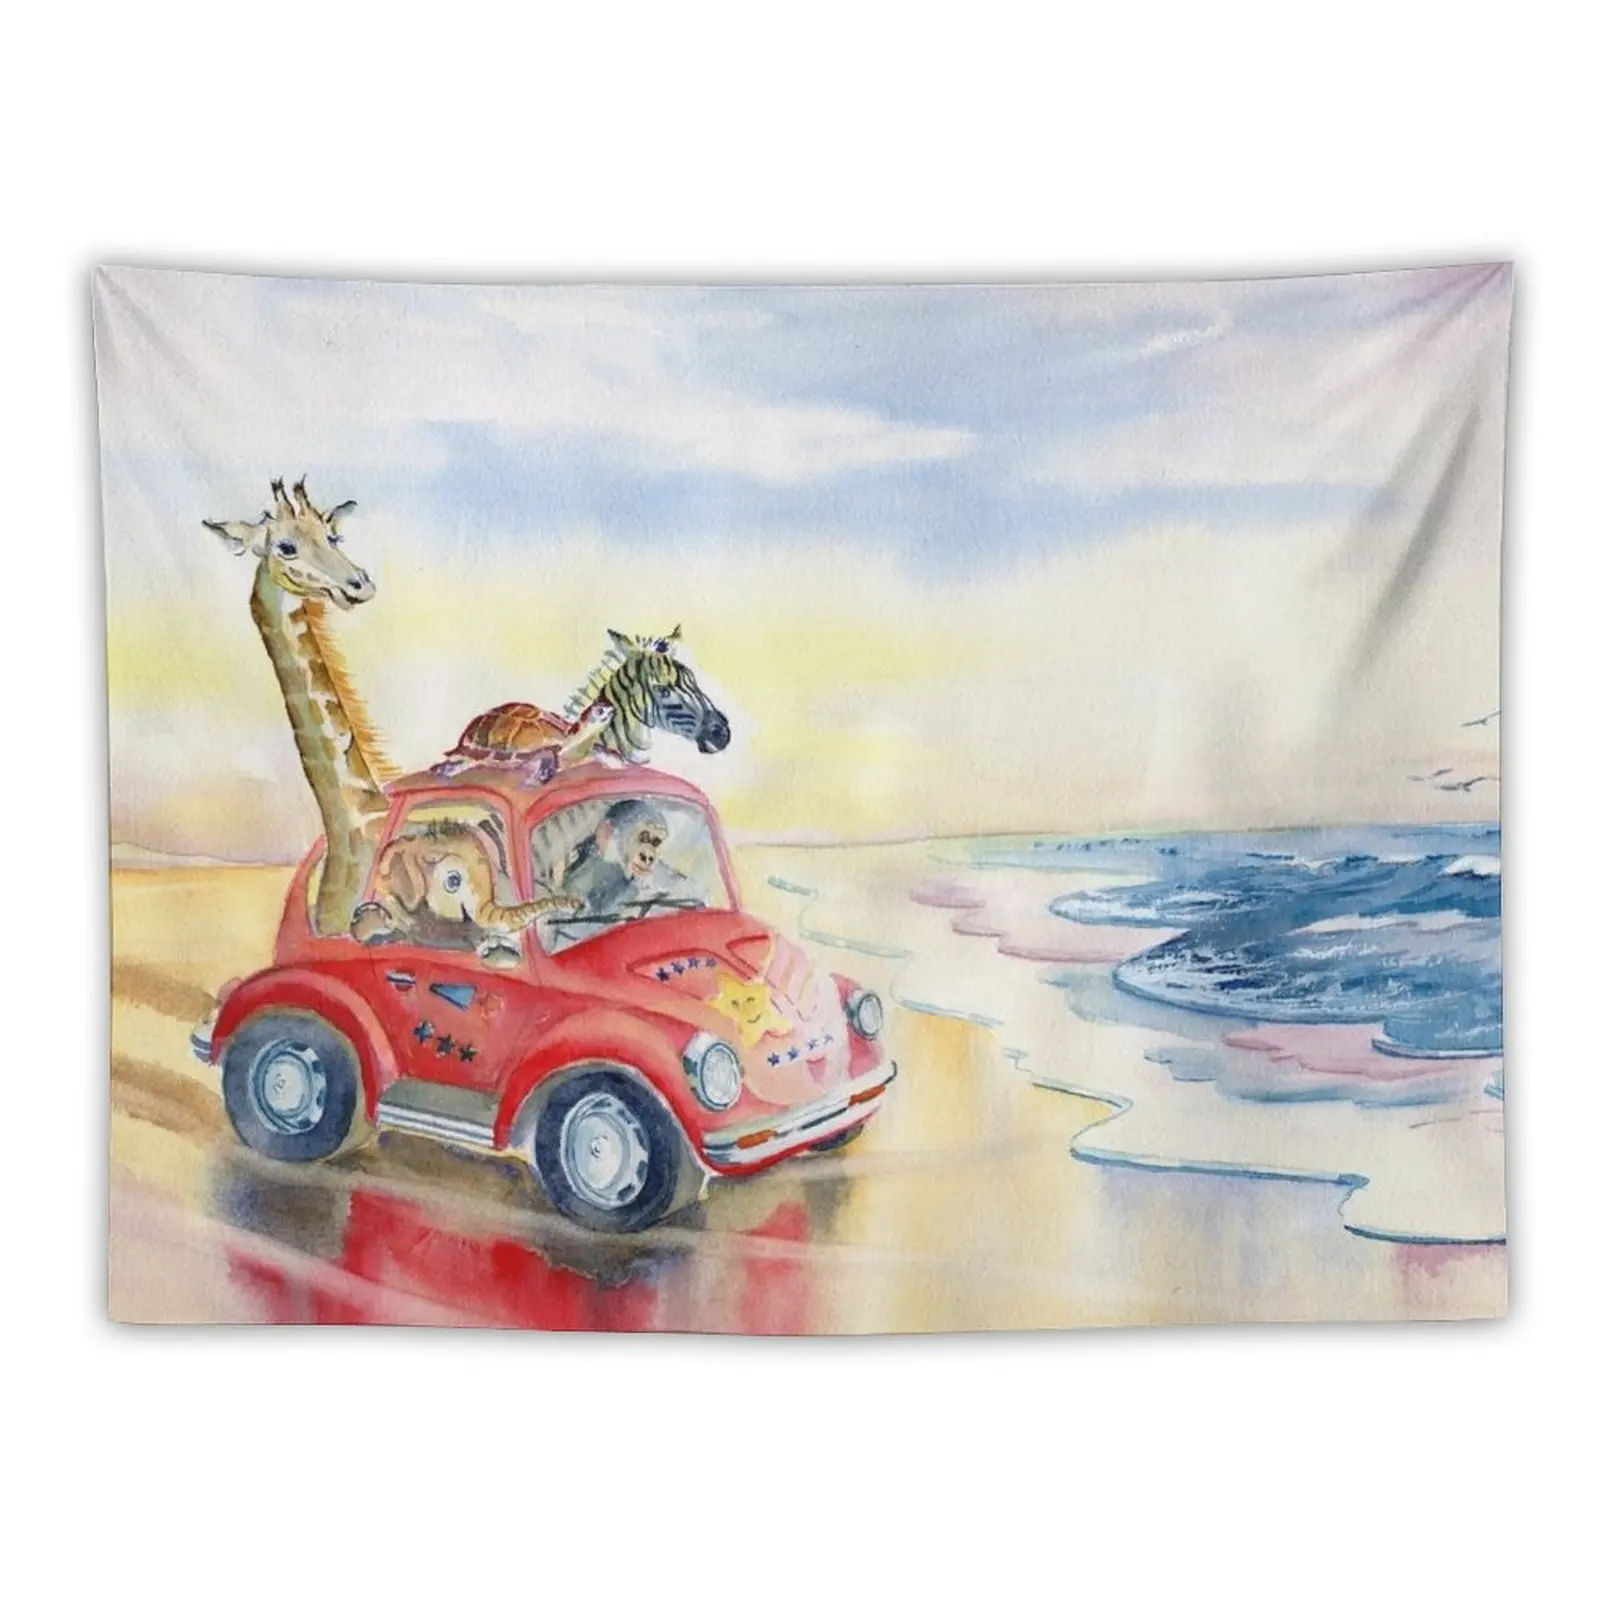 

Go To The Beach Tapestry Wall Hanging Decor House Decorations Bedrooms Decorations Korean Room Decor